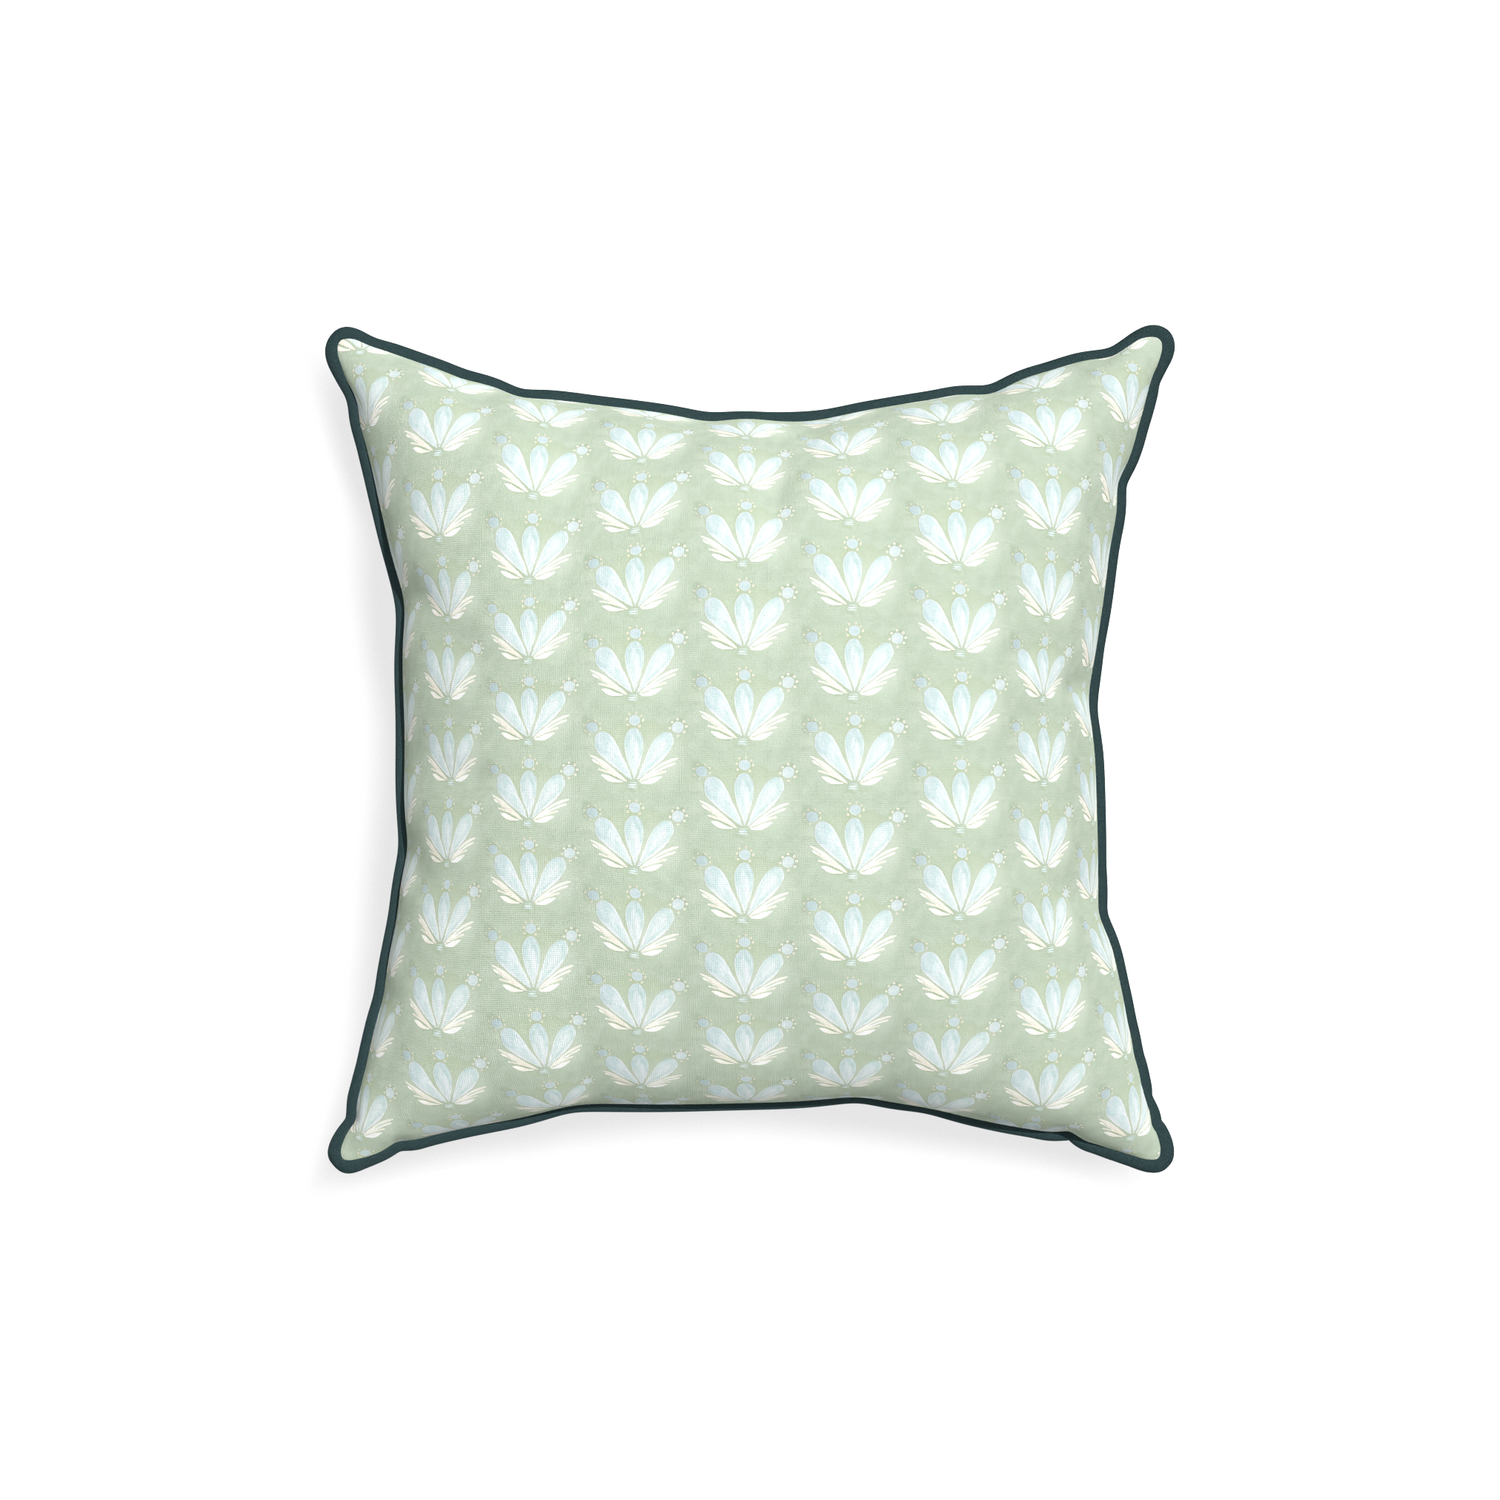 18-square serena sea salt custom blue & green floral drop repeatpillow with p piping on white background